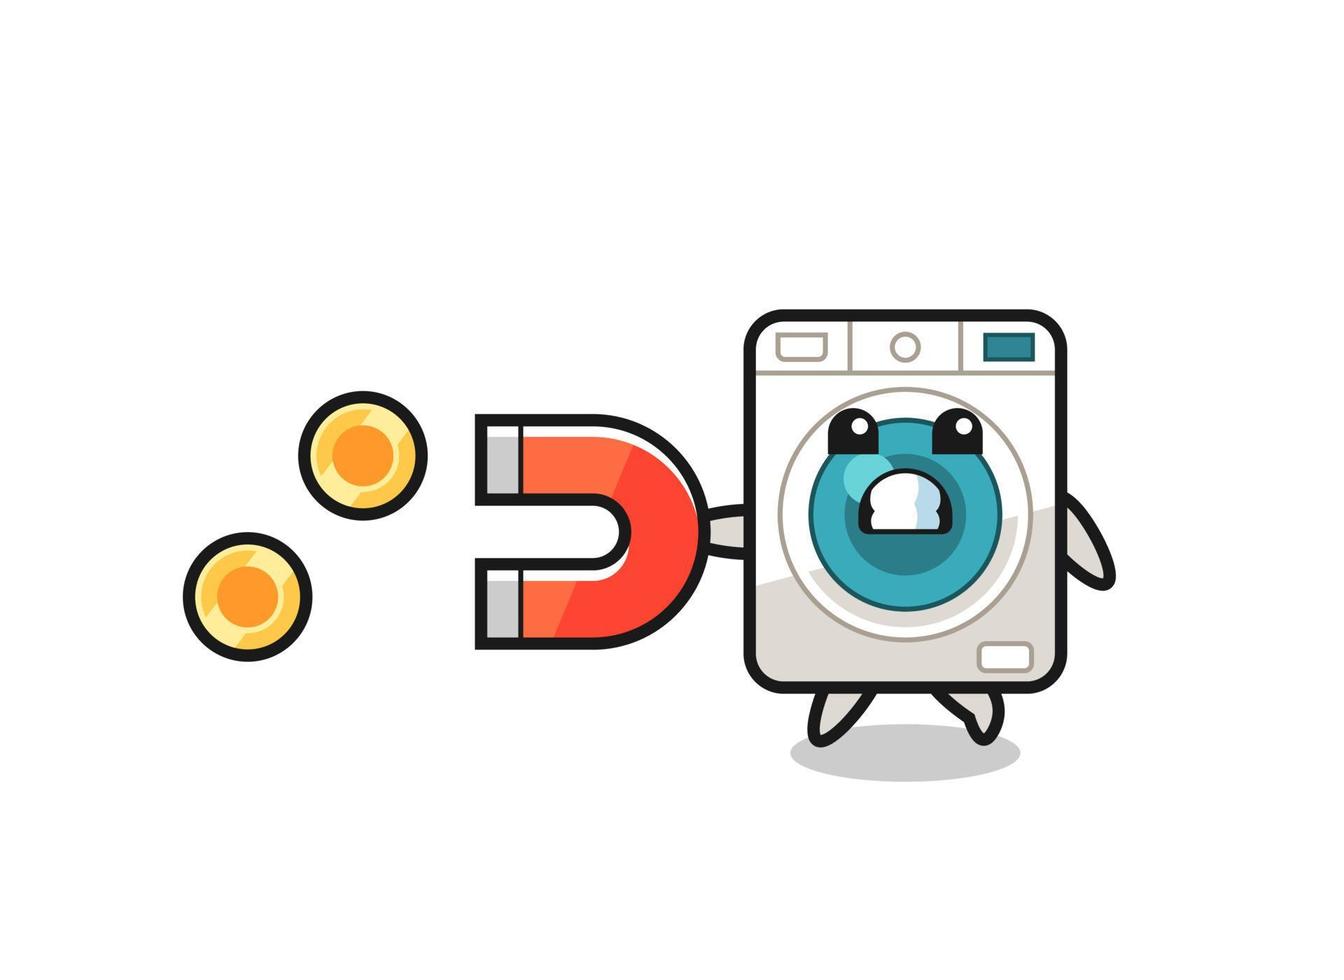 the character of washing machine hold a magnet to catch the gold coins vector